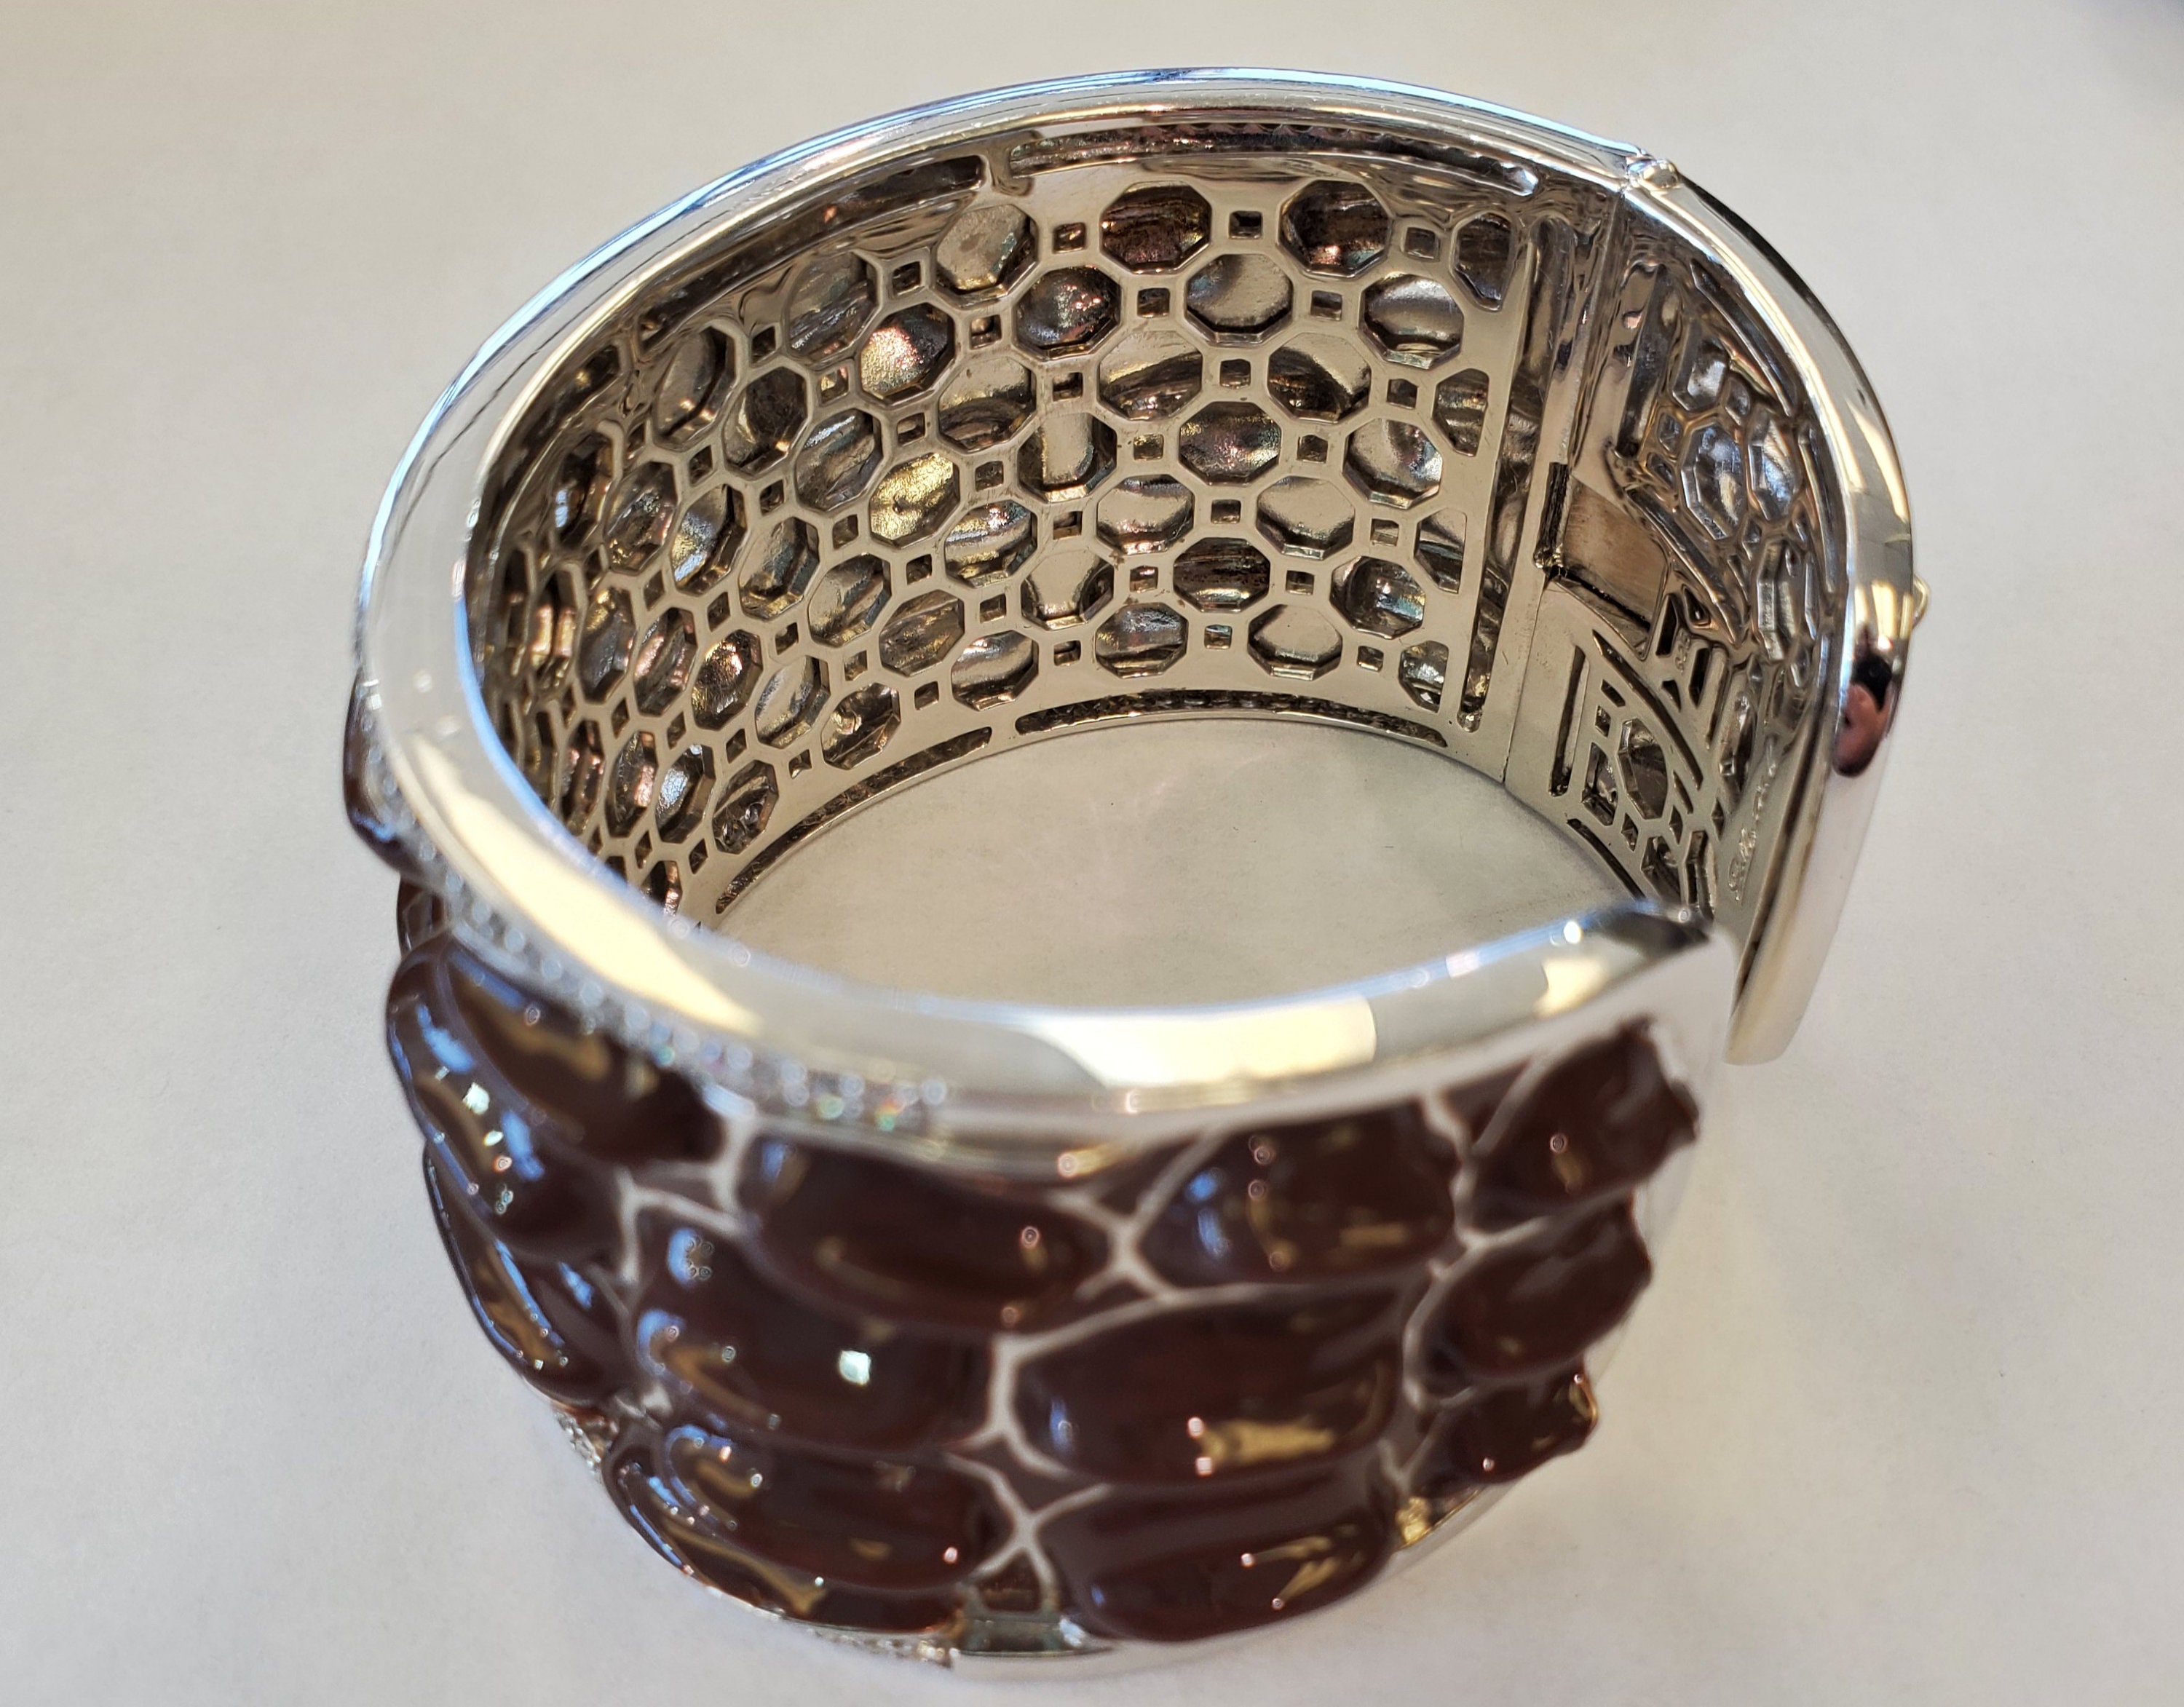 Product Image for Belle Etoile Croccodrillo brown enamel and CZ cuff bracelet